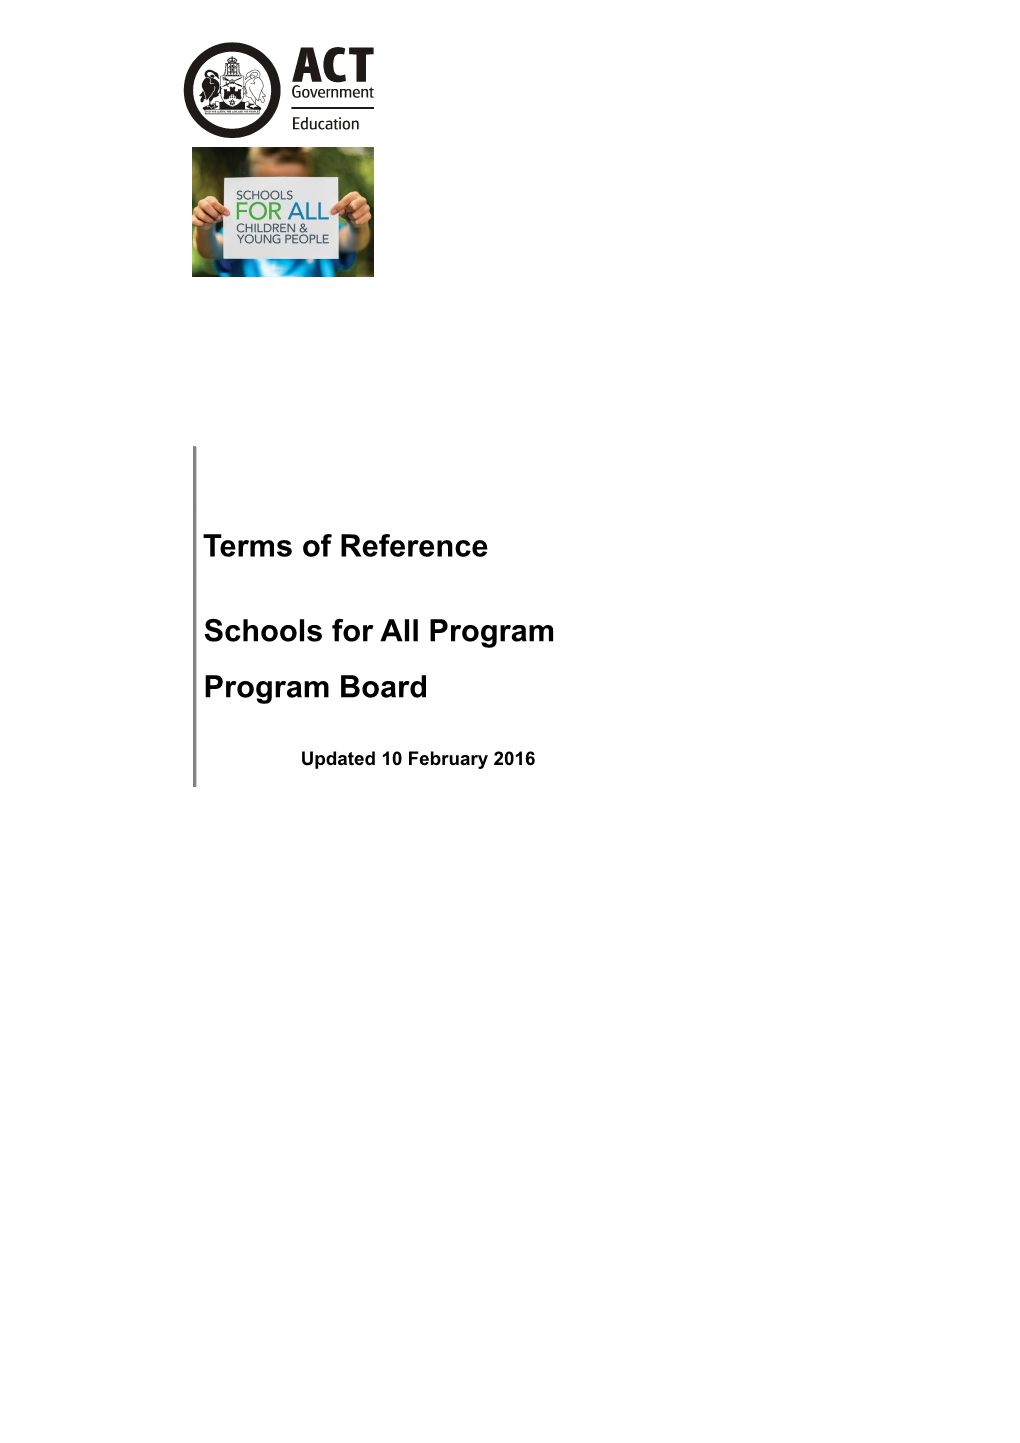 Schools for All Program Board - Terms of Reference